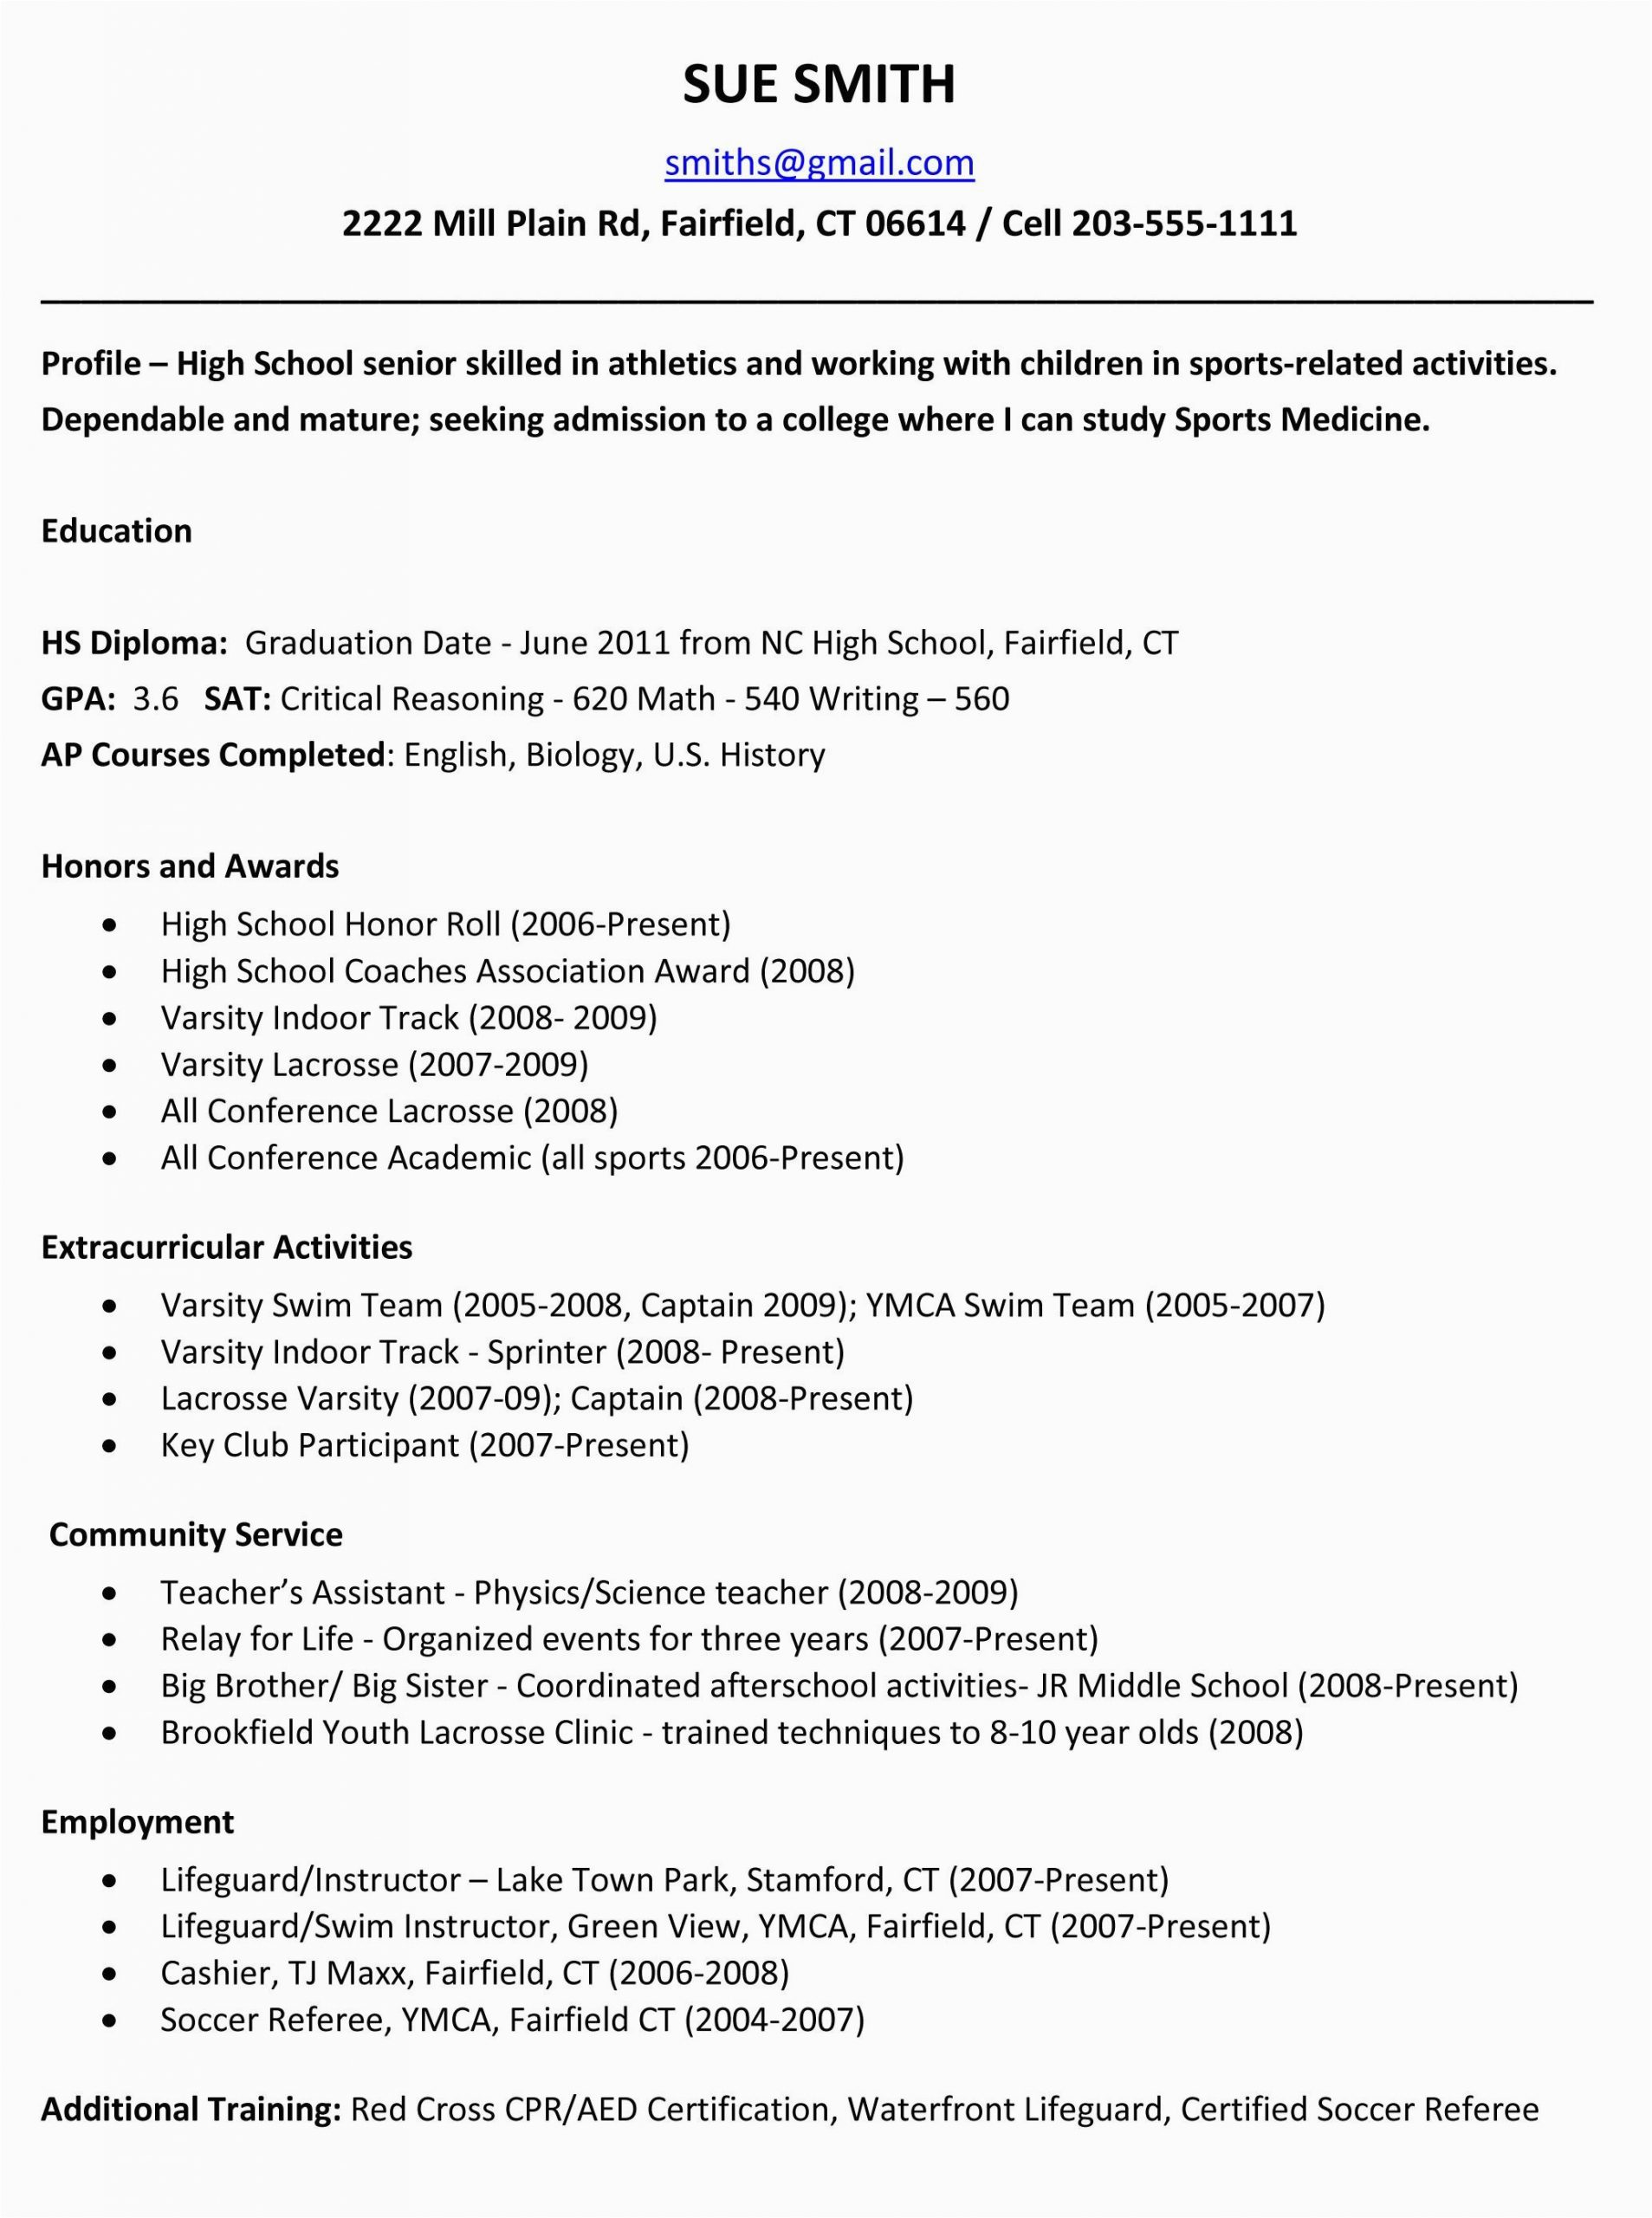 Sample Resume for High School Student for College Sample Resumes